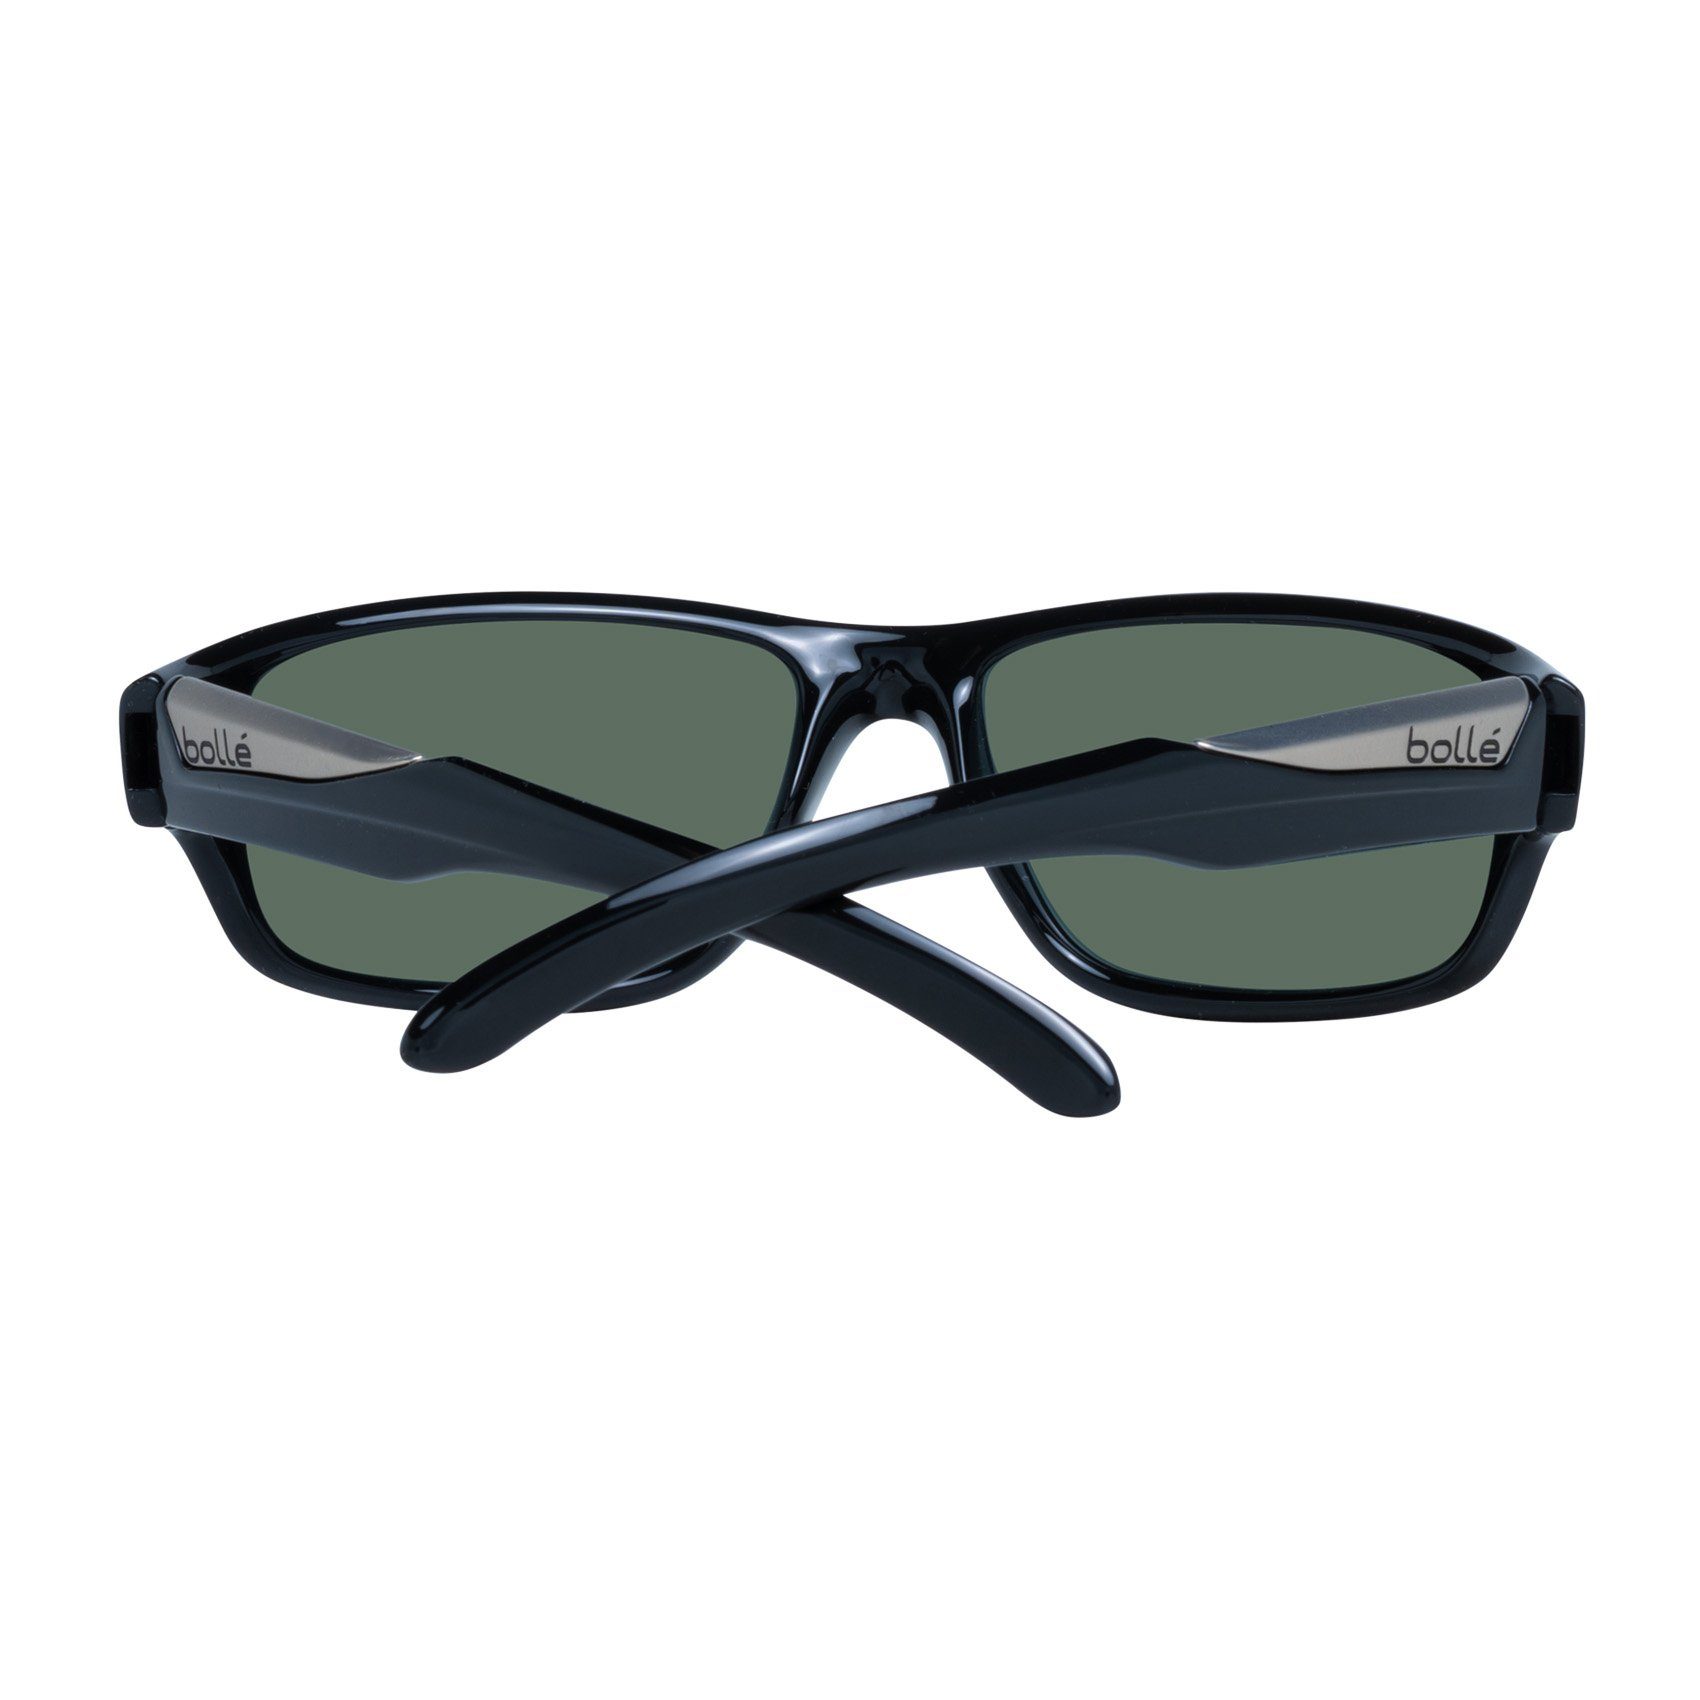 Sonnenbrille 11651 Black Italy Made 59 Vibe in Shiny Bolle